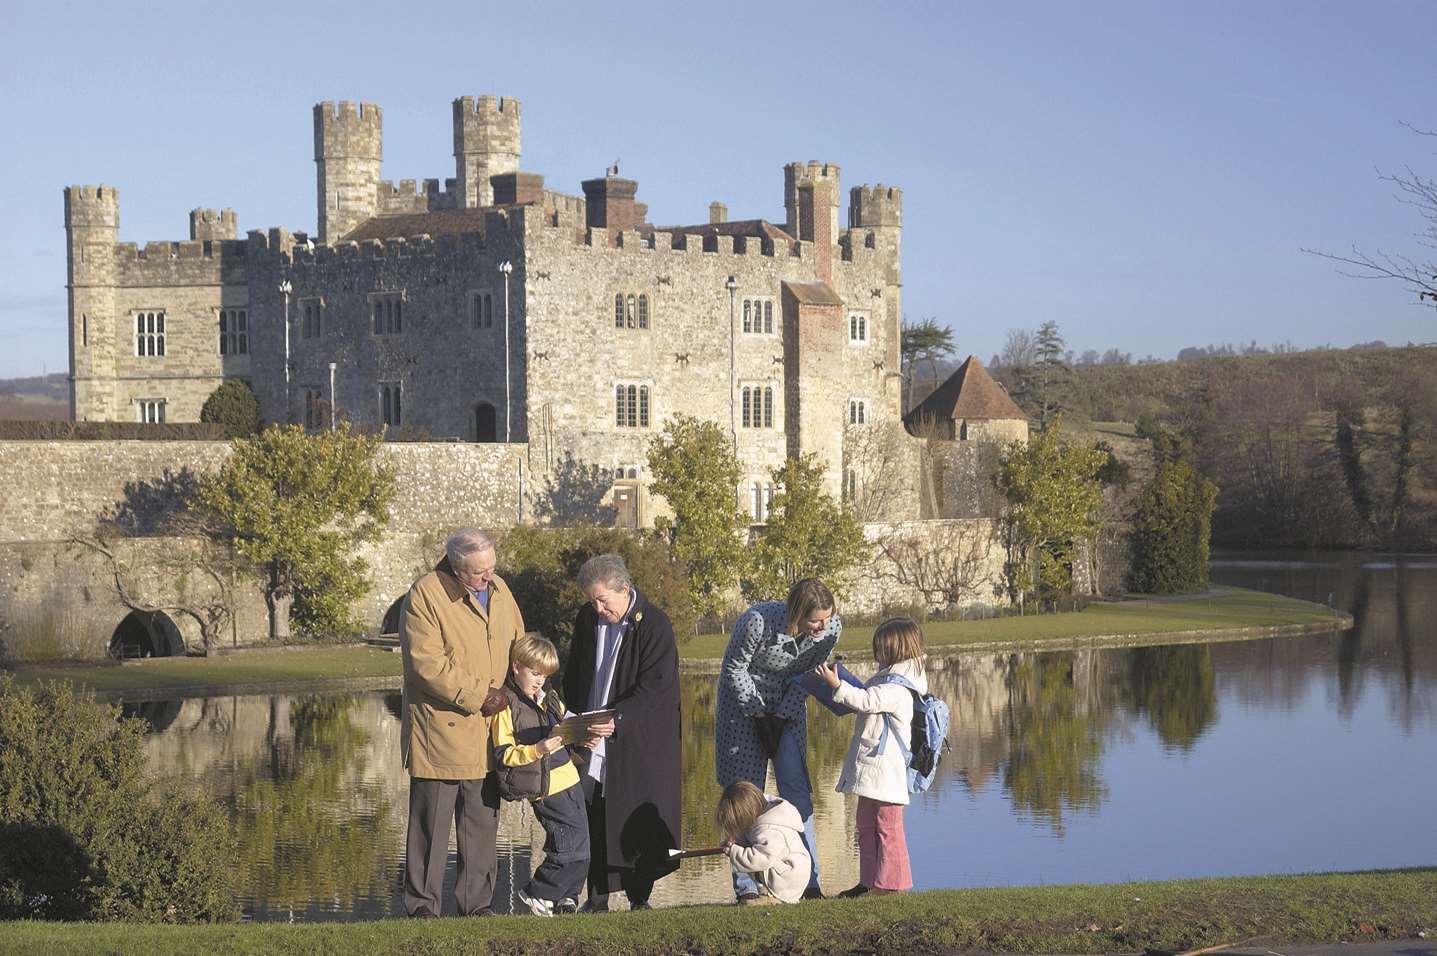 Leeds Castle attracts families all year round